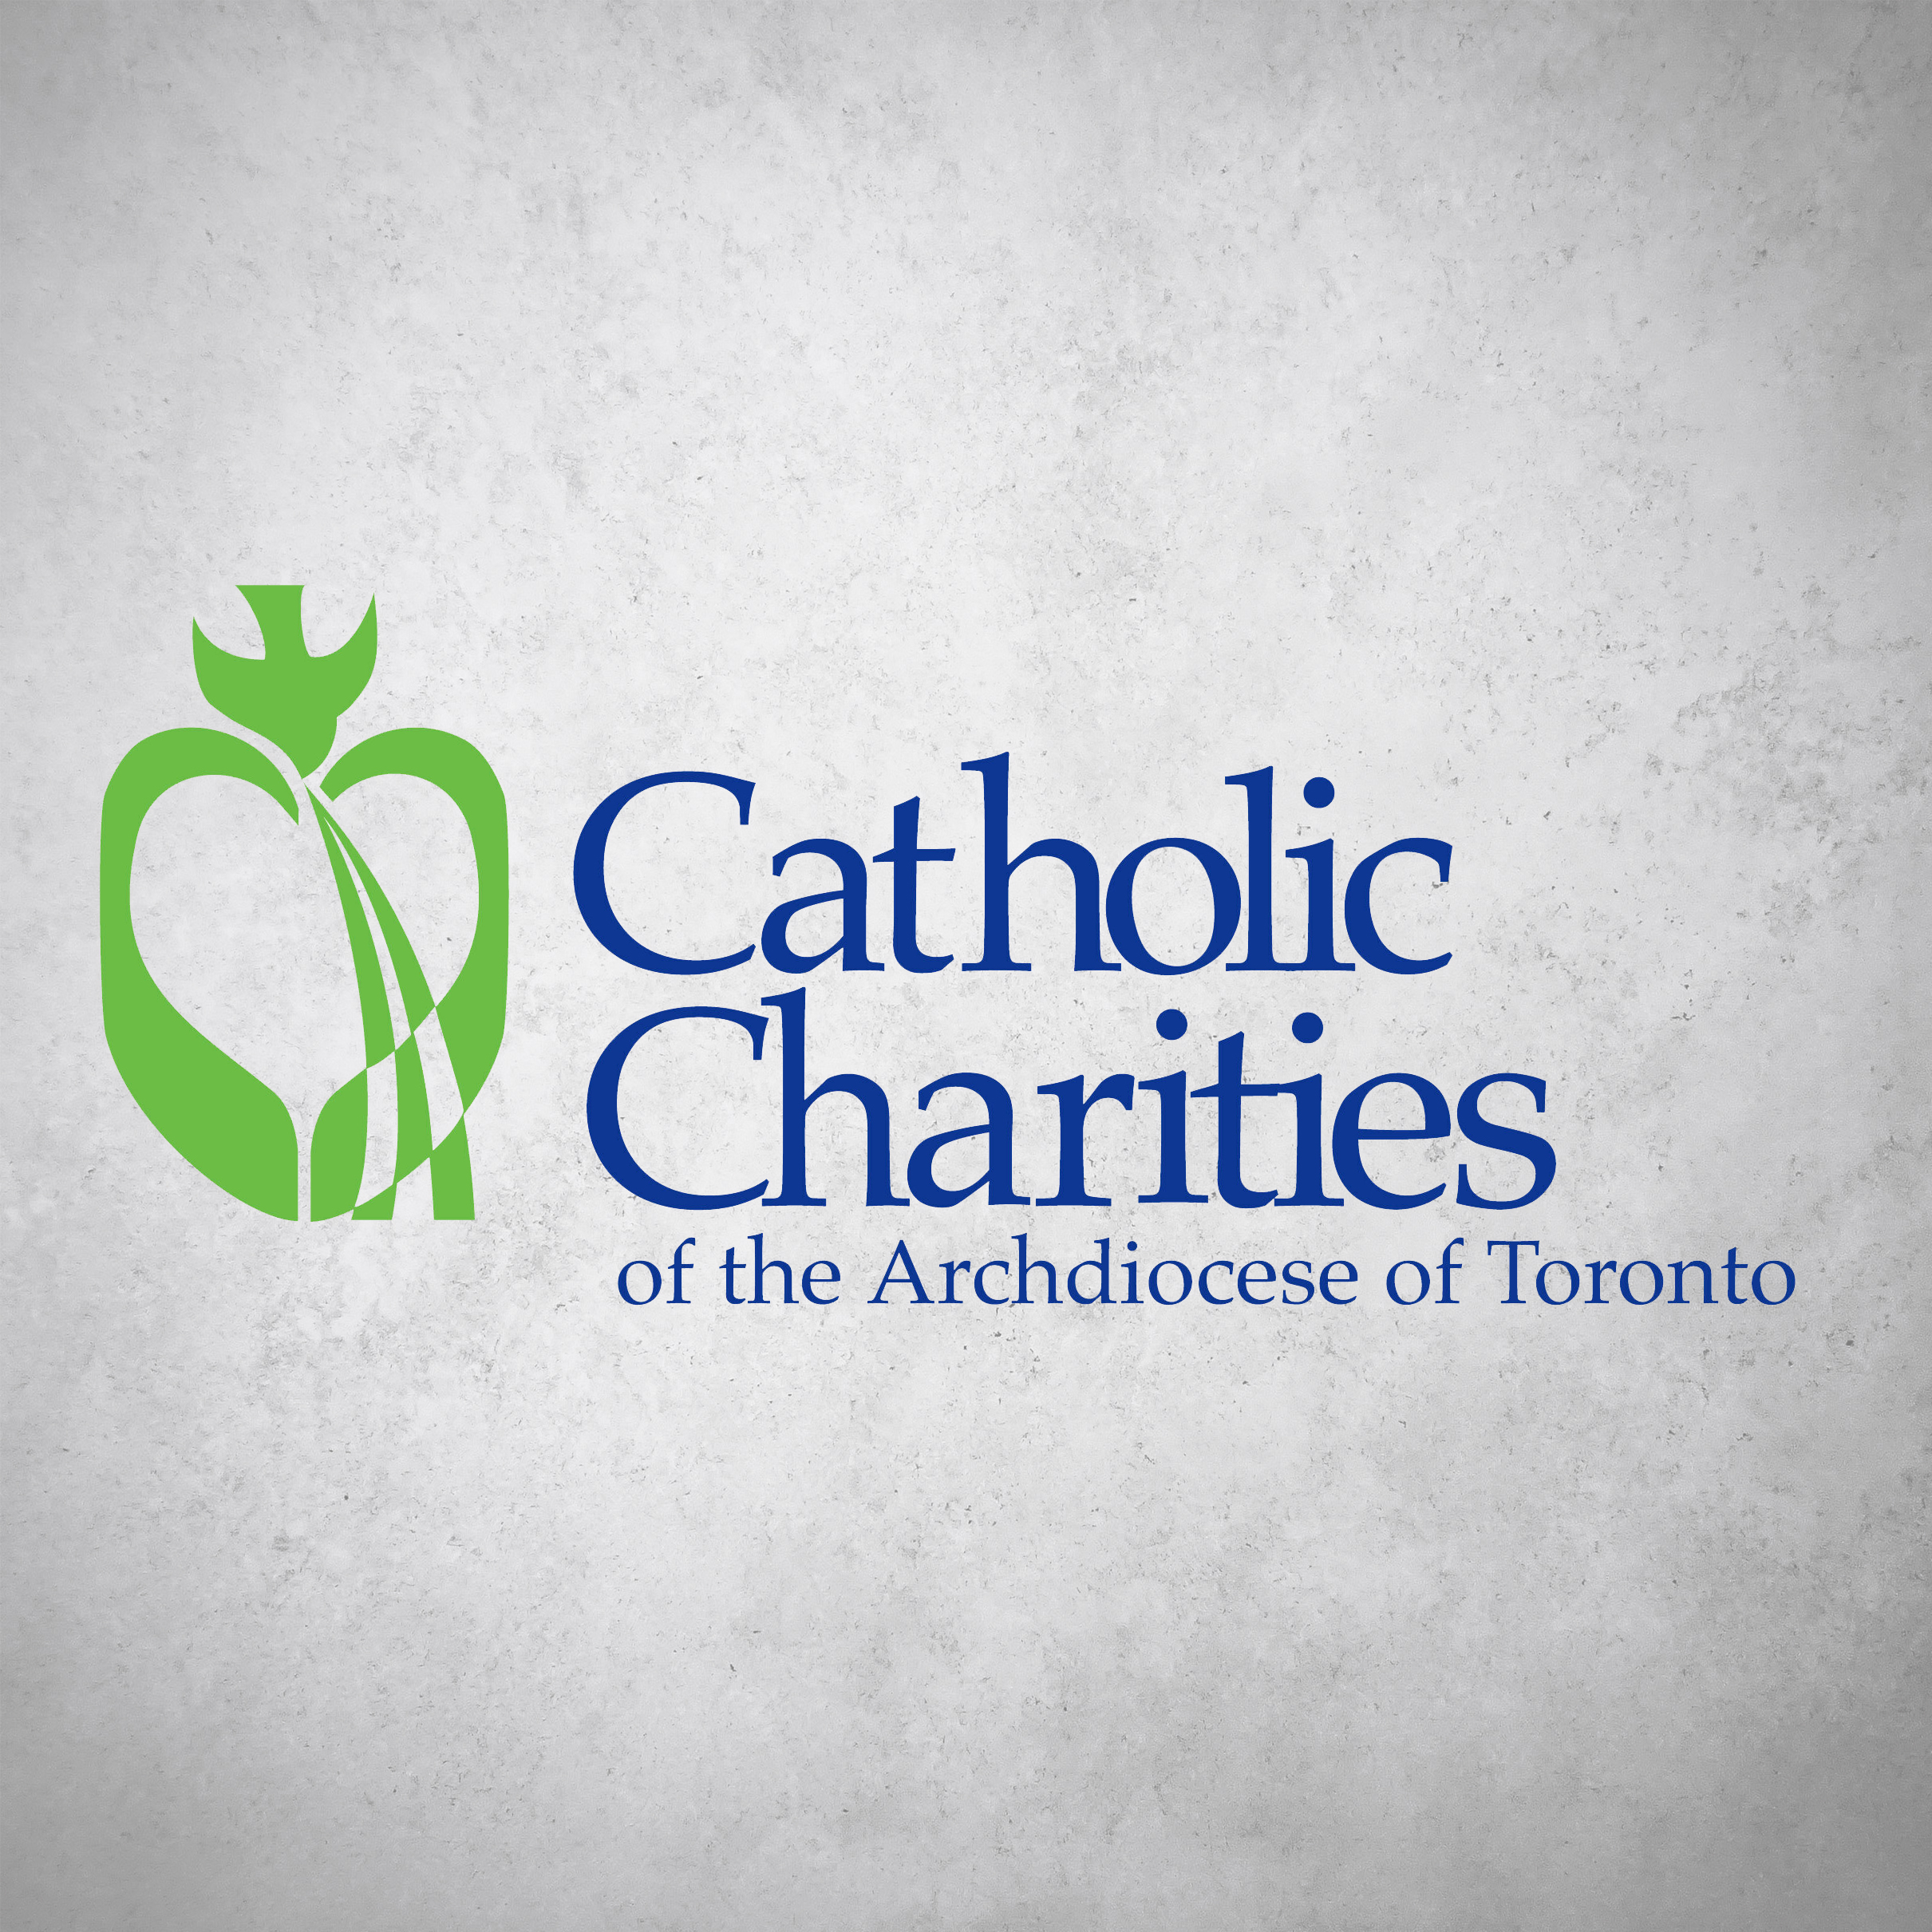 Catholic Charities of the Archdiocese of Toronto